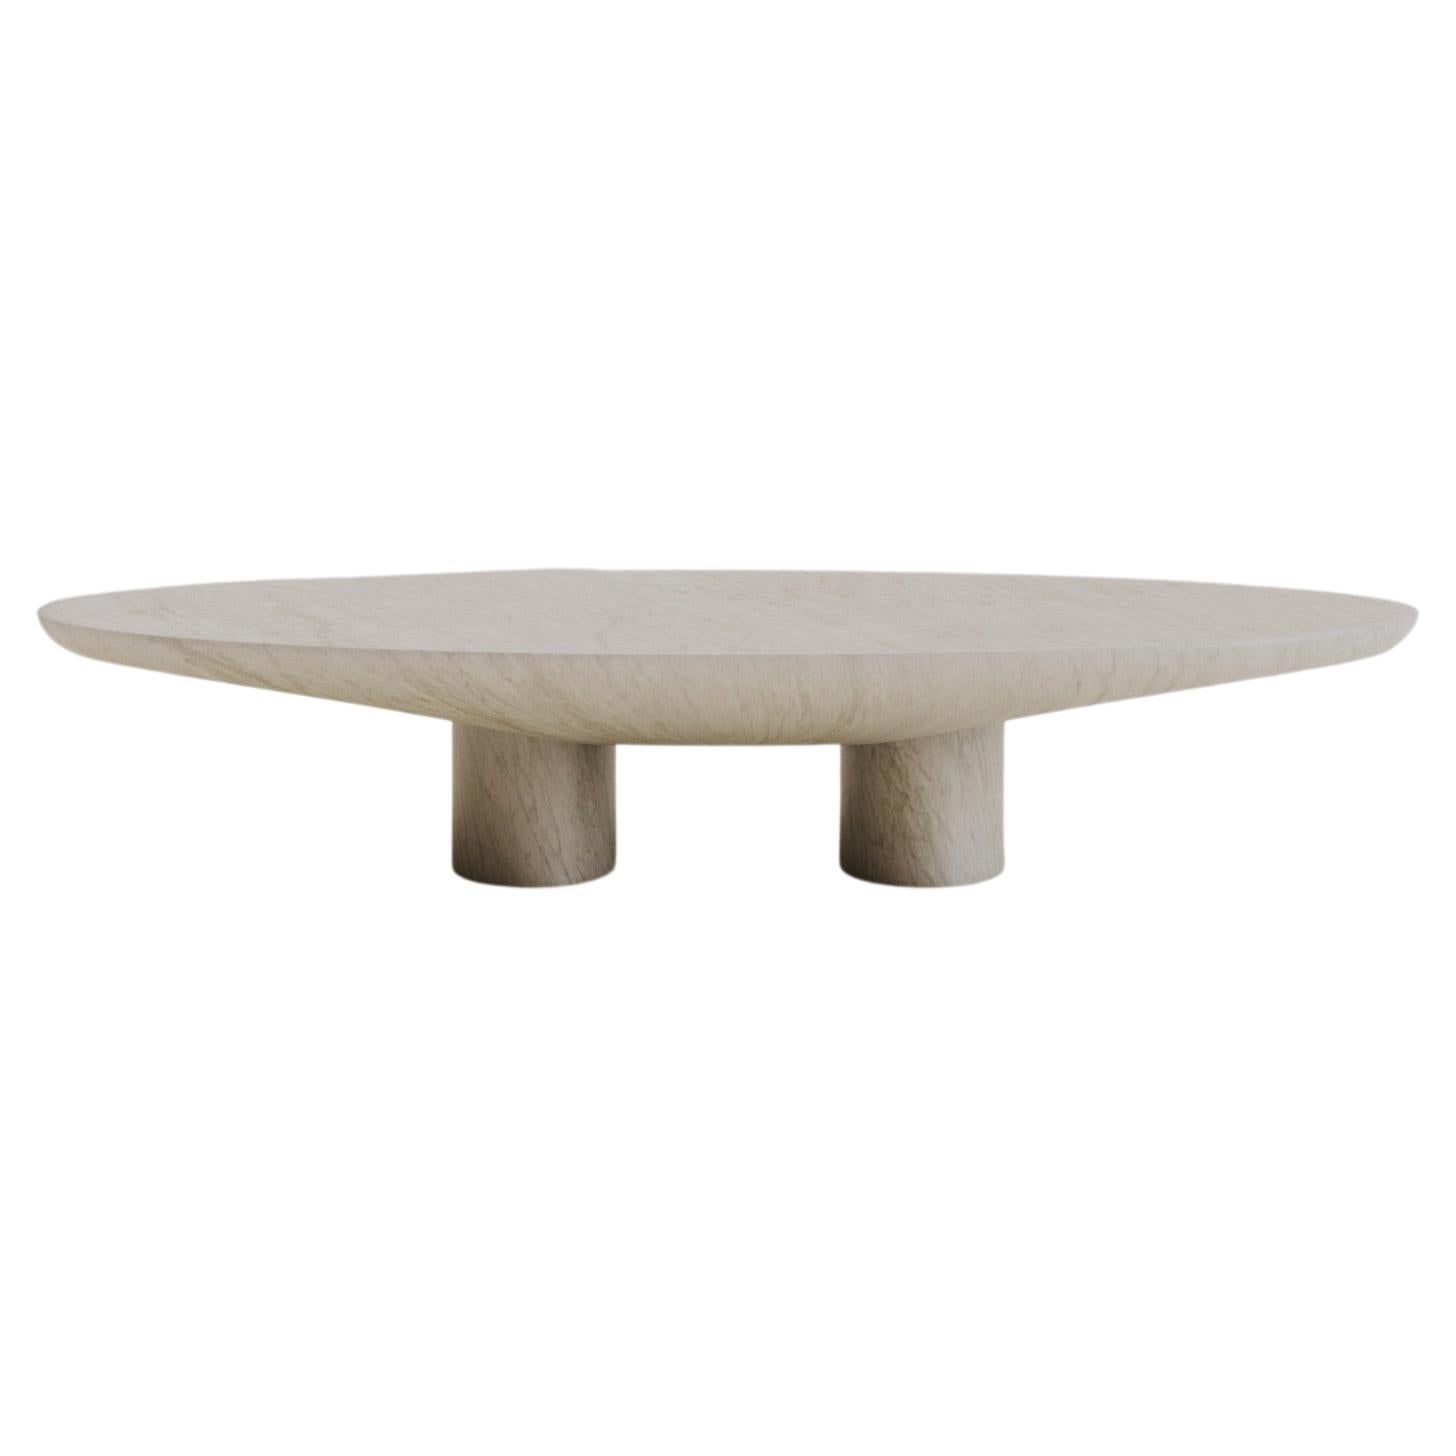 Solid White Marble Abraccio Oval Coffee Table 140 by Studio Narra For Sale